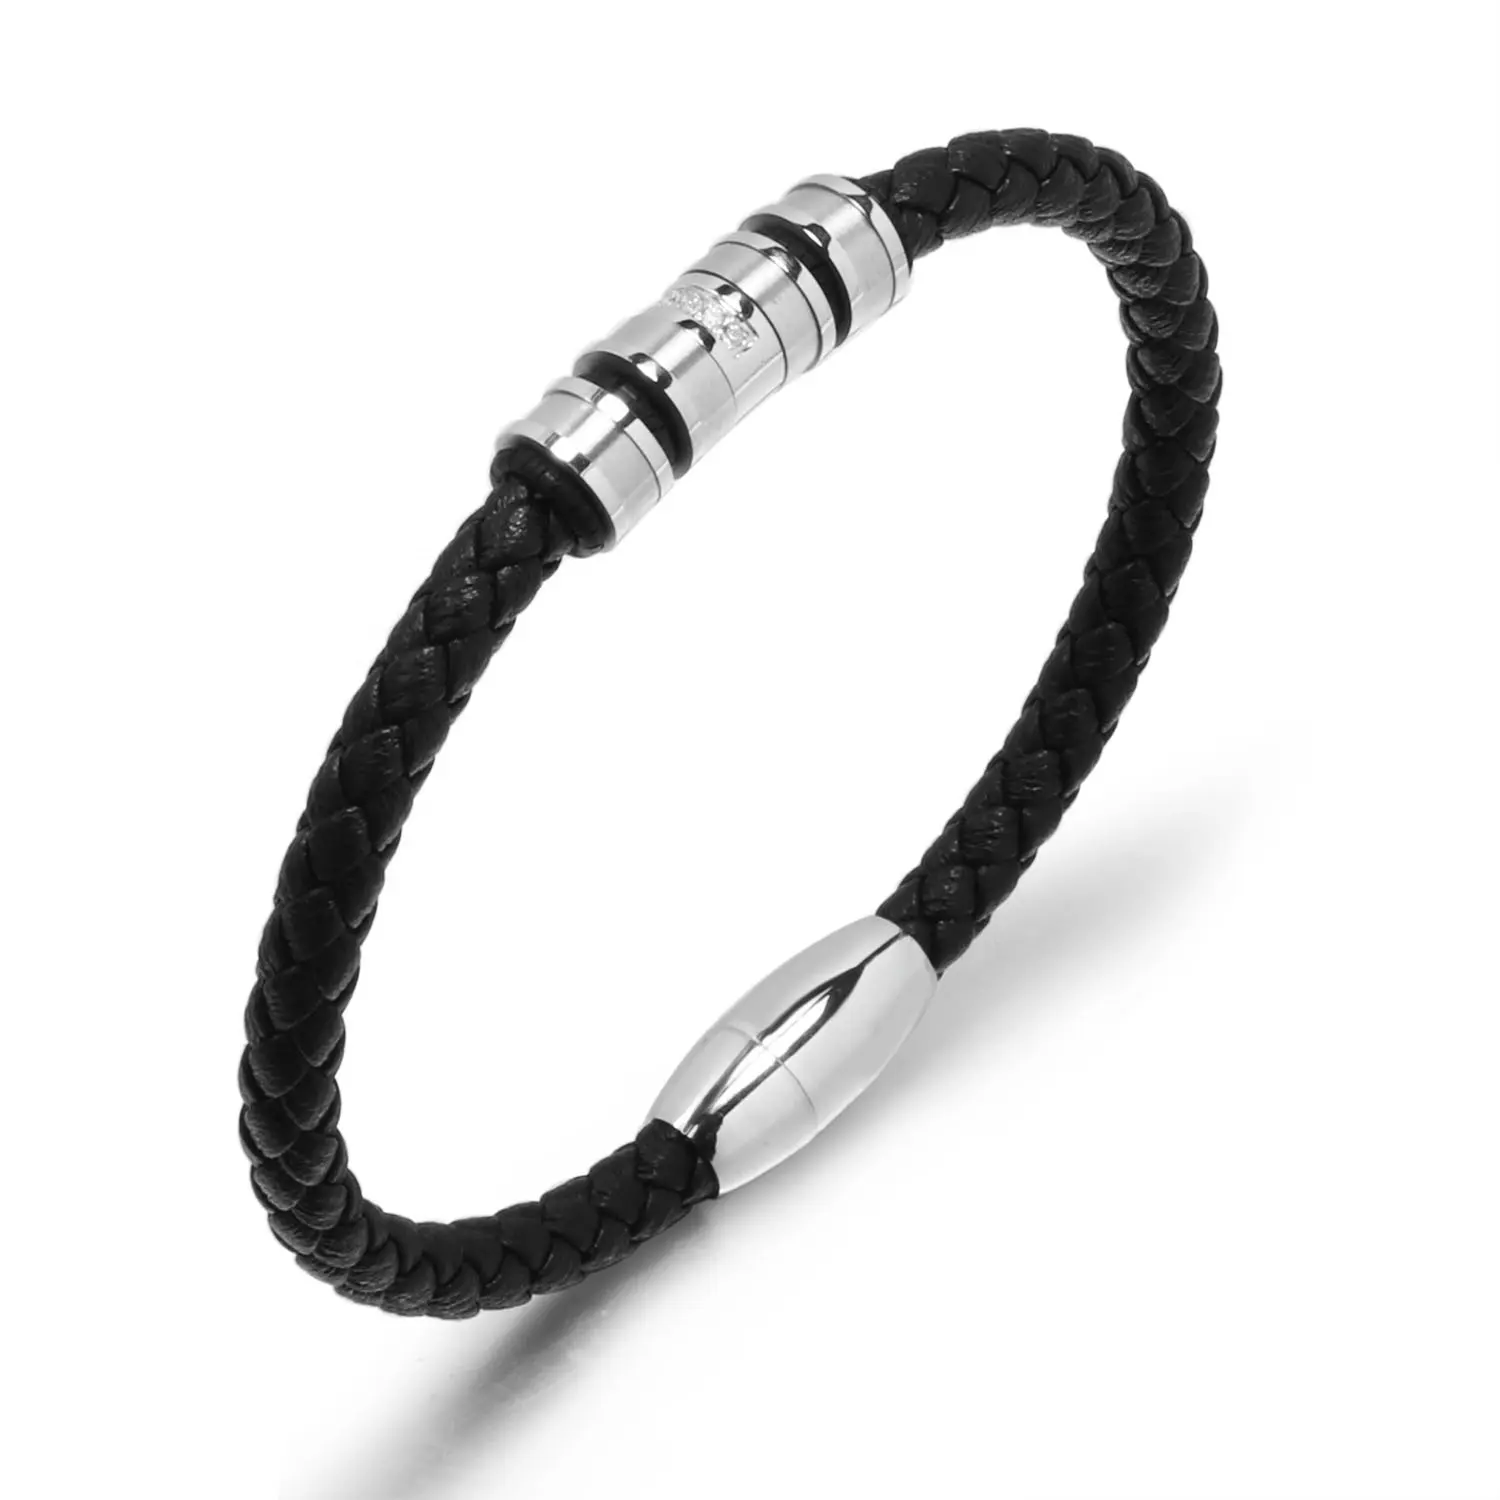 Customized Personalized Mens Leather Bracelet with Custom Beads Engraved Names Braid Leather Bracelet for Men